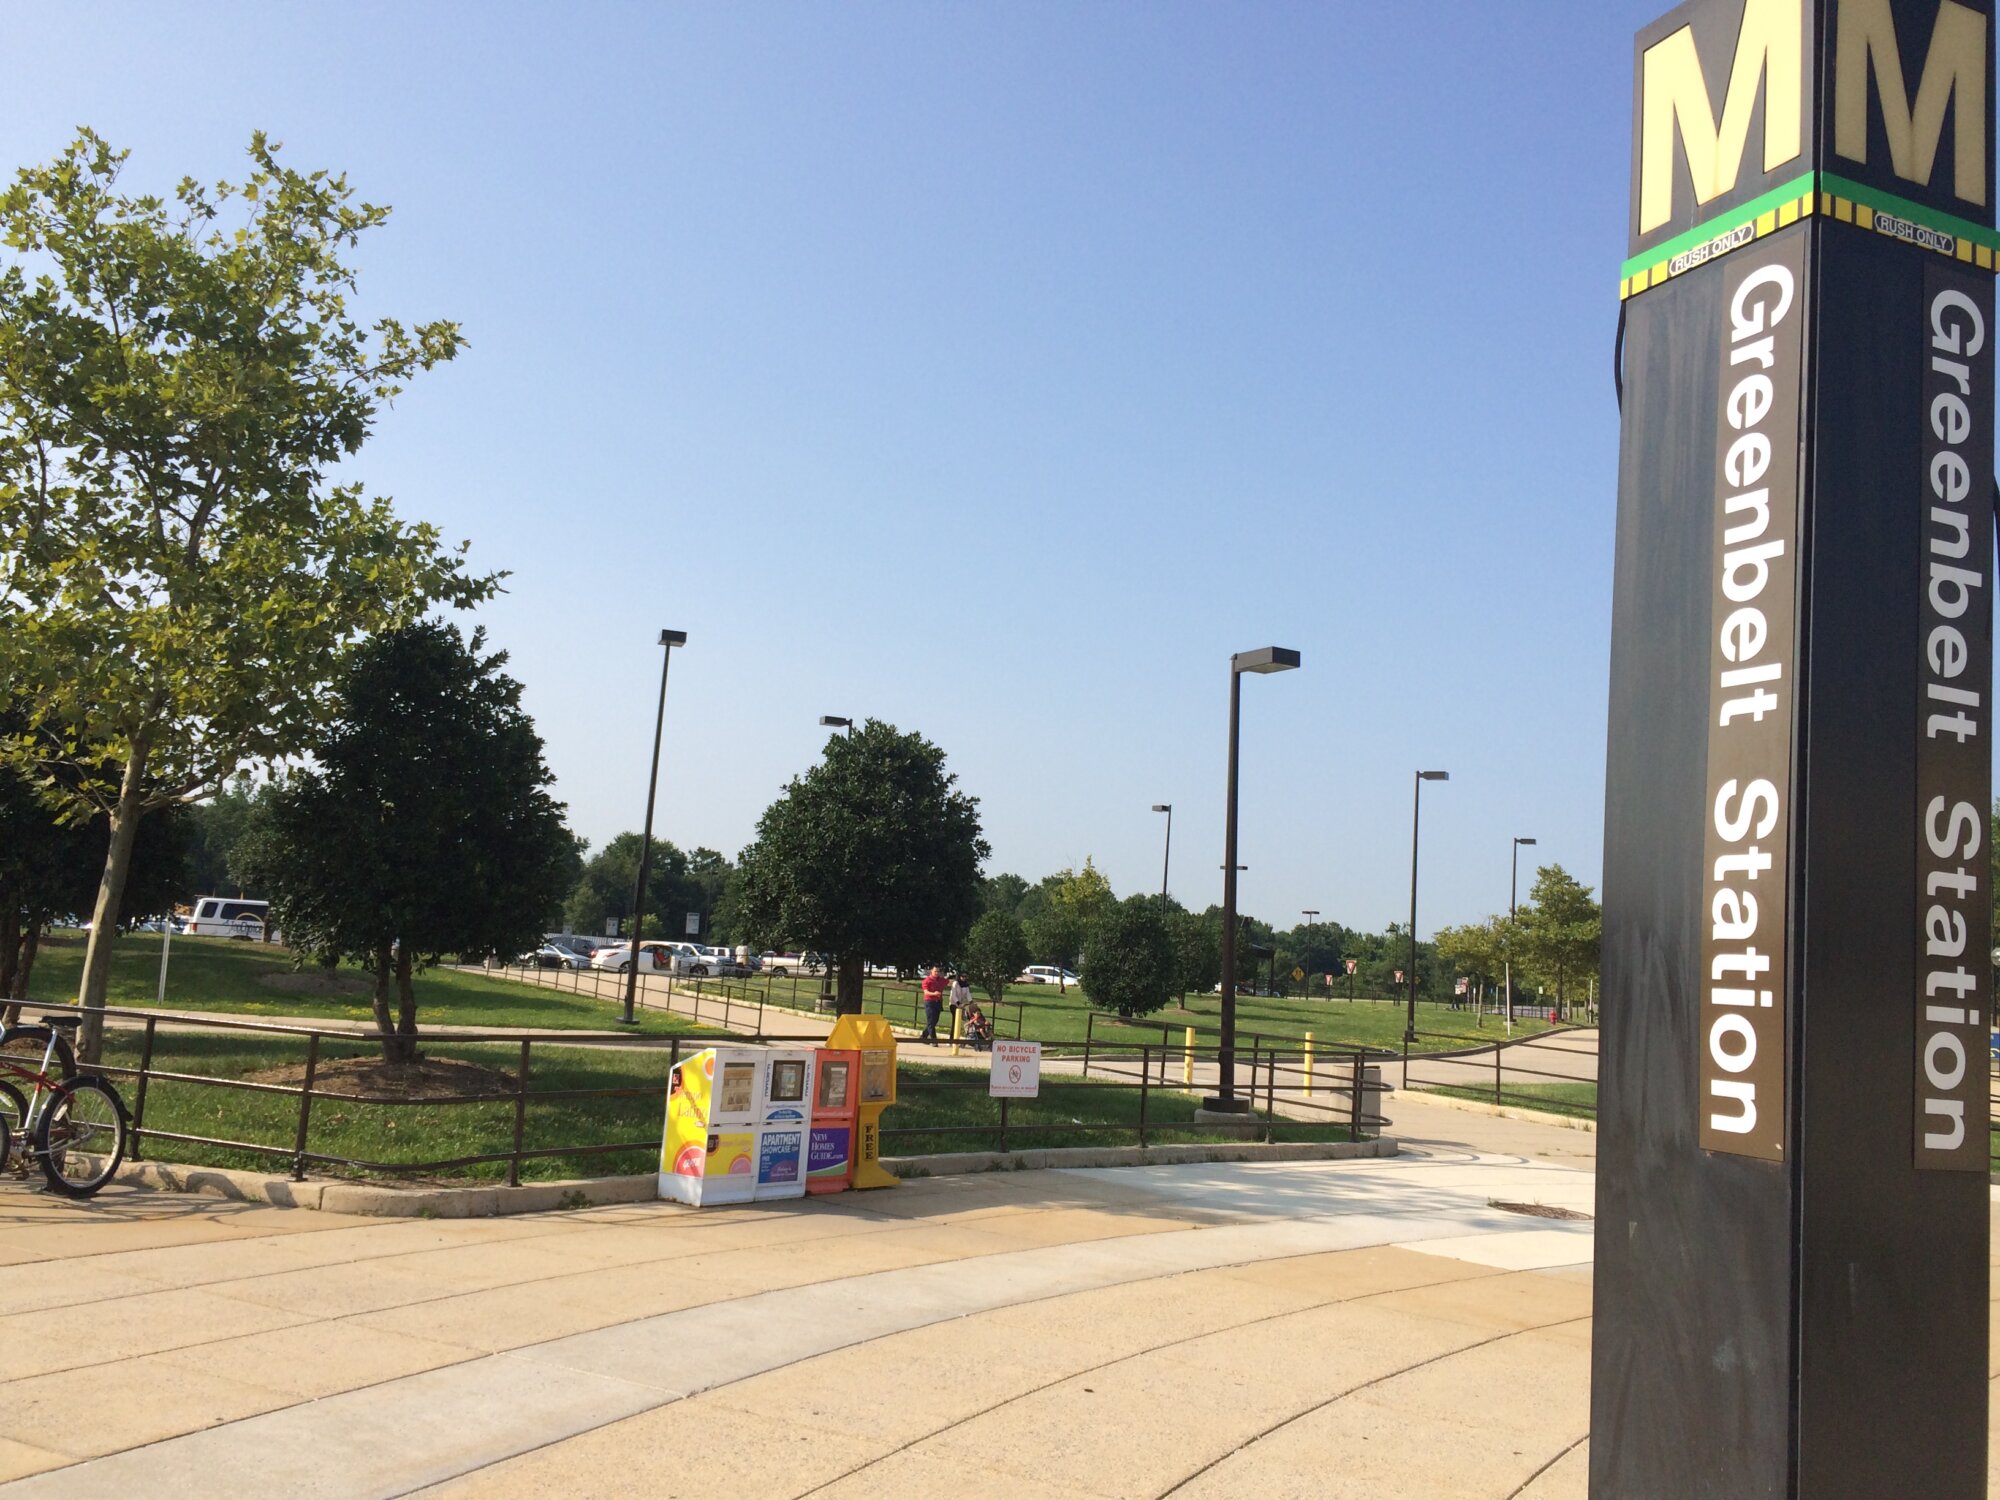 Greenbelt police to increase presence at Metro station after carjacking